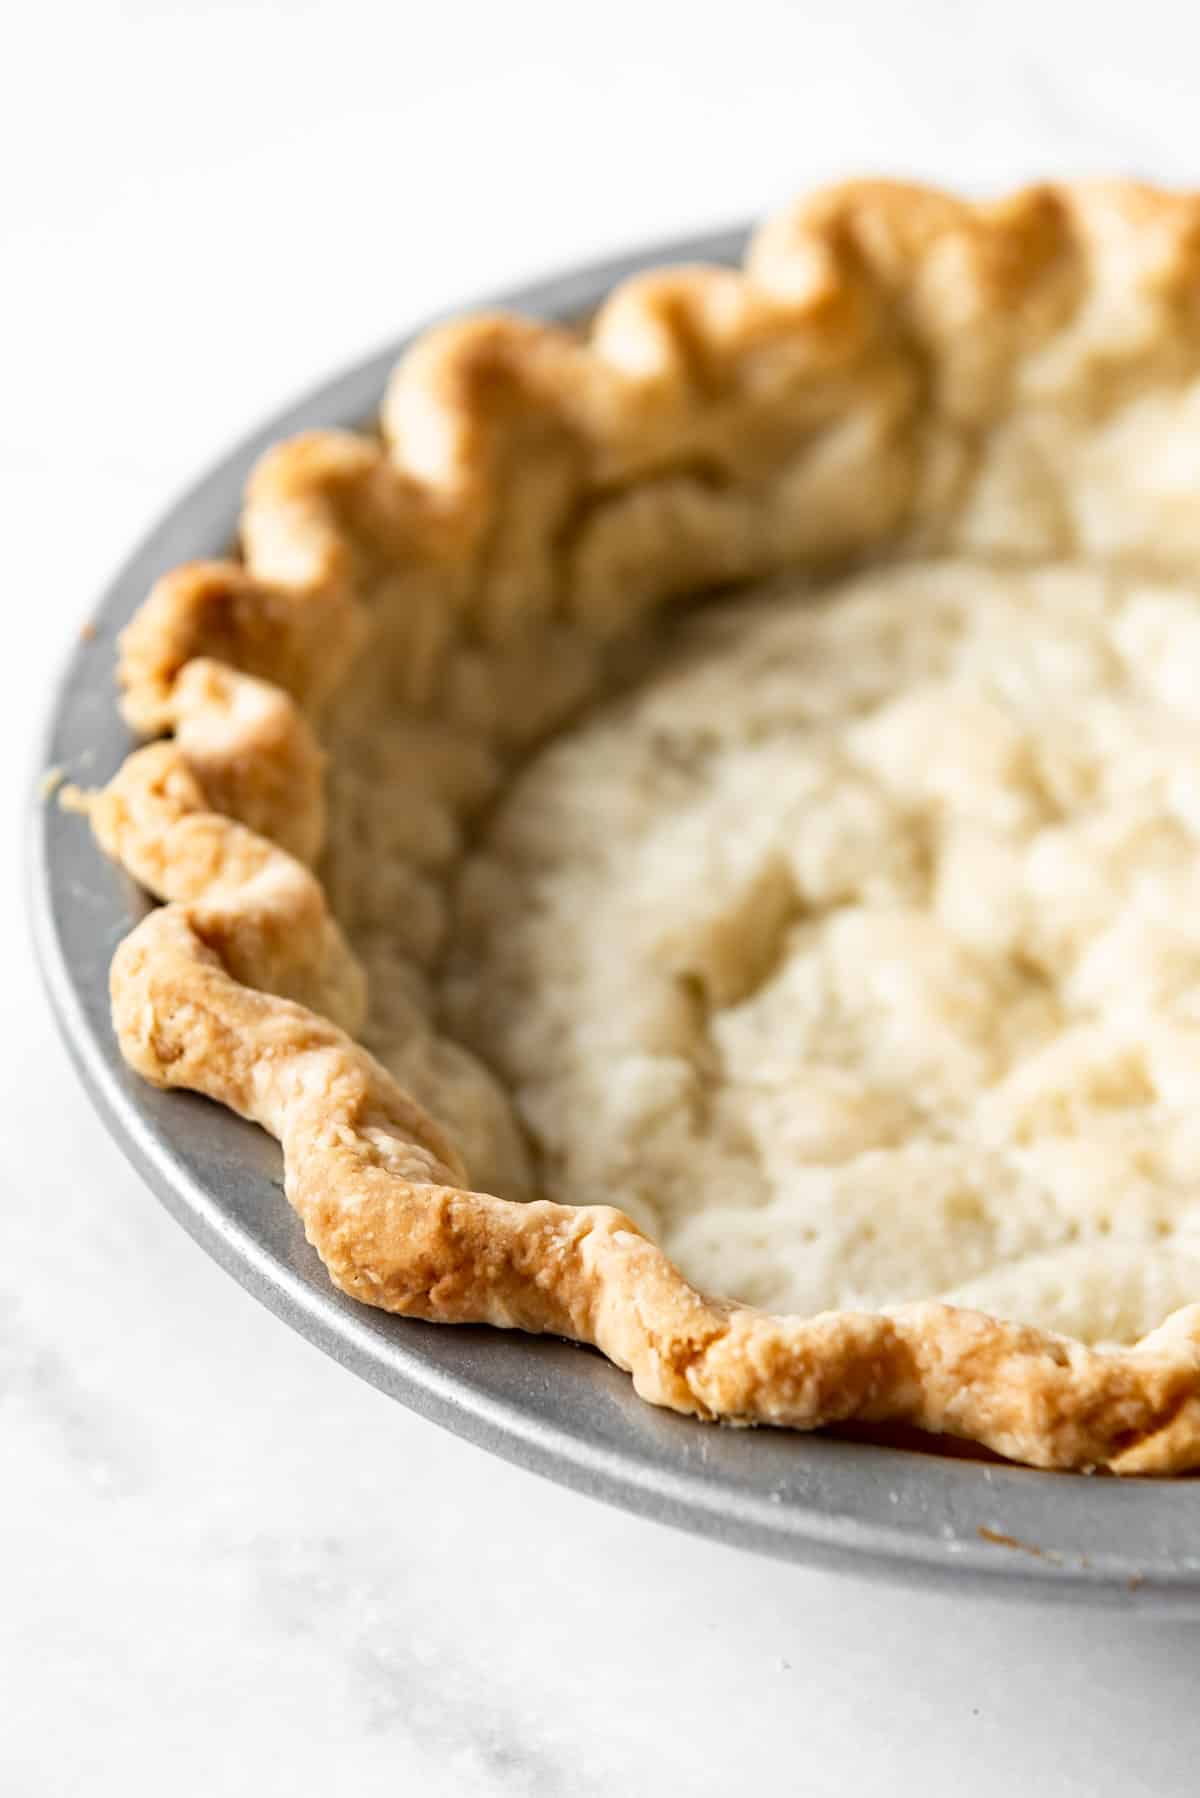 A full-baked pie crust in a metal pie plate.